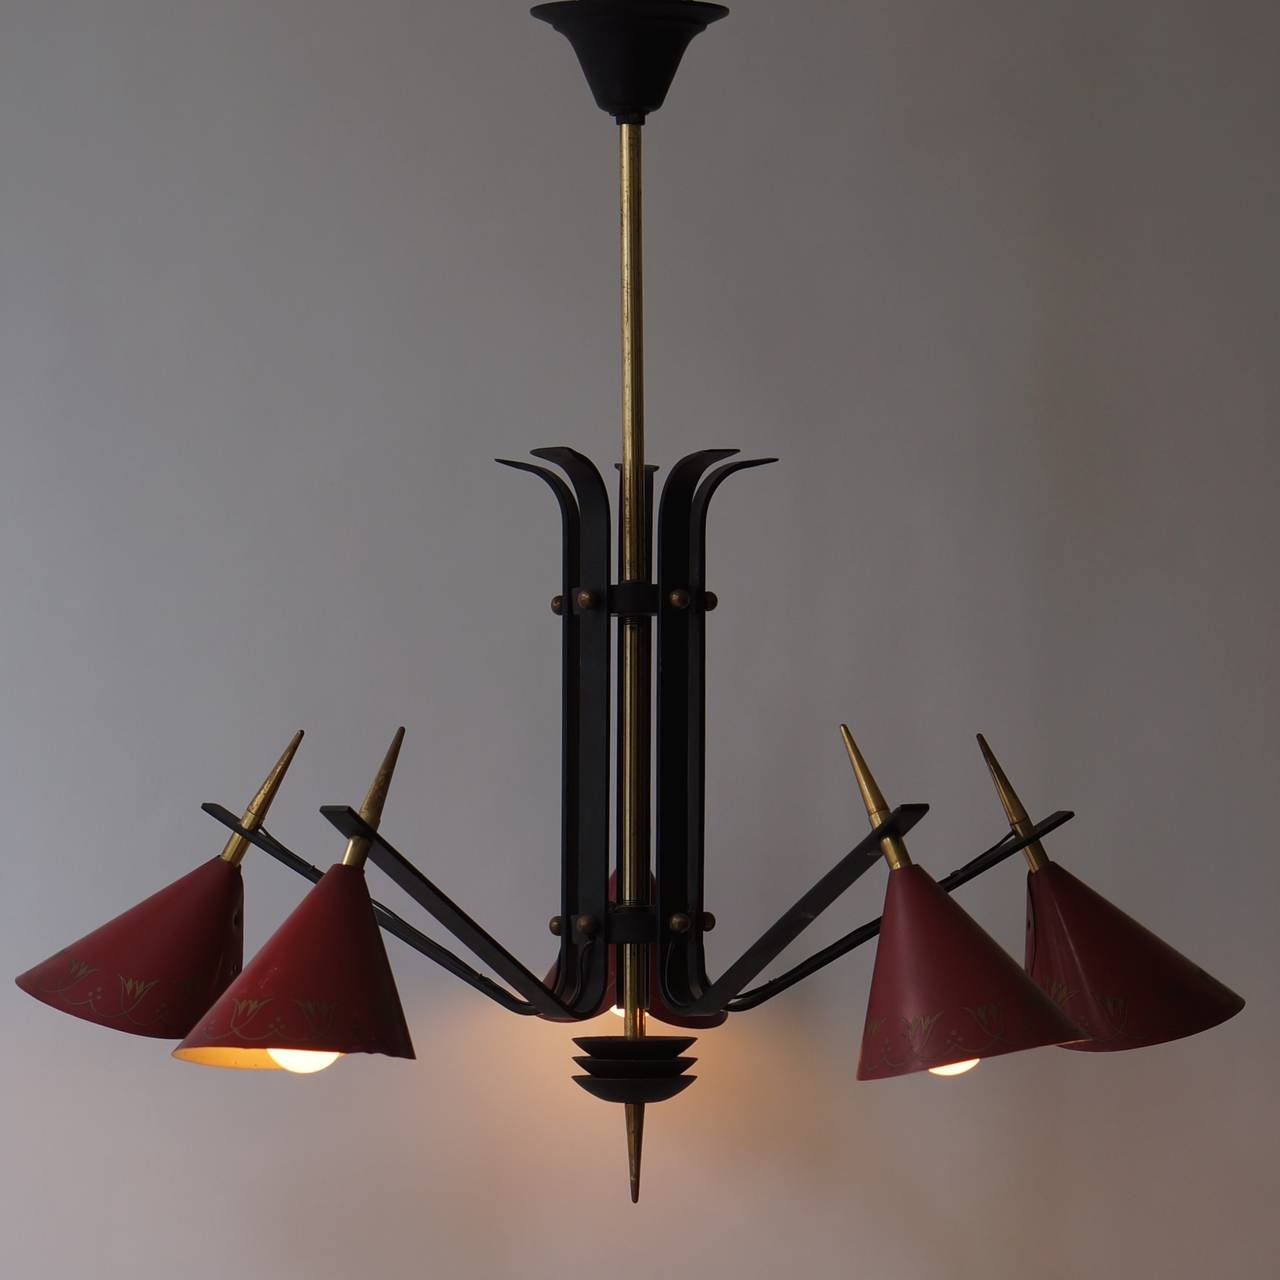 Italian five-light ceiling light.
Diameter 76 cm.
Height 70 cm.
There is still the original wiring in the chandelier and there are five E27 bulbs with screw fitting.